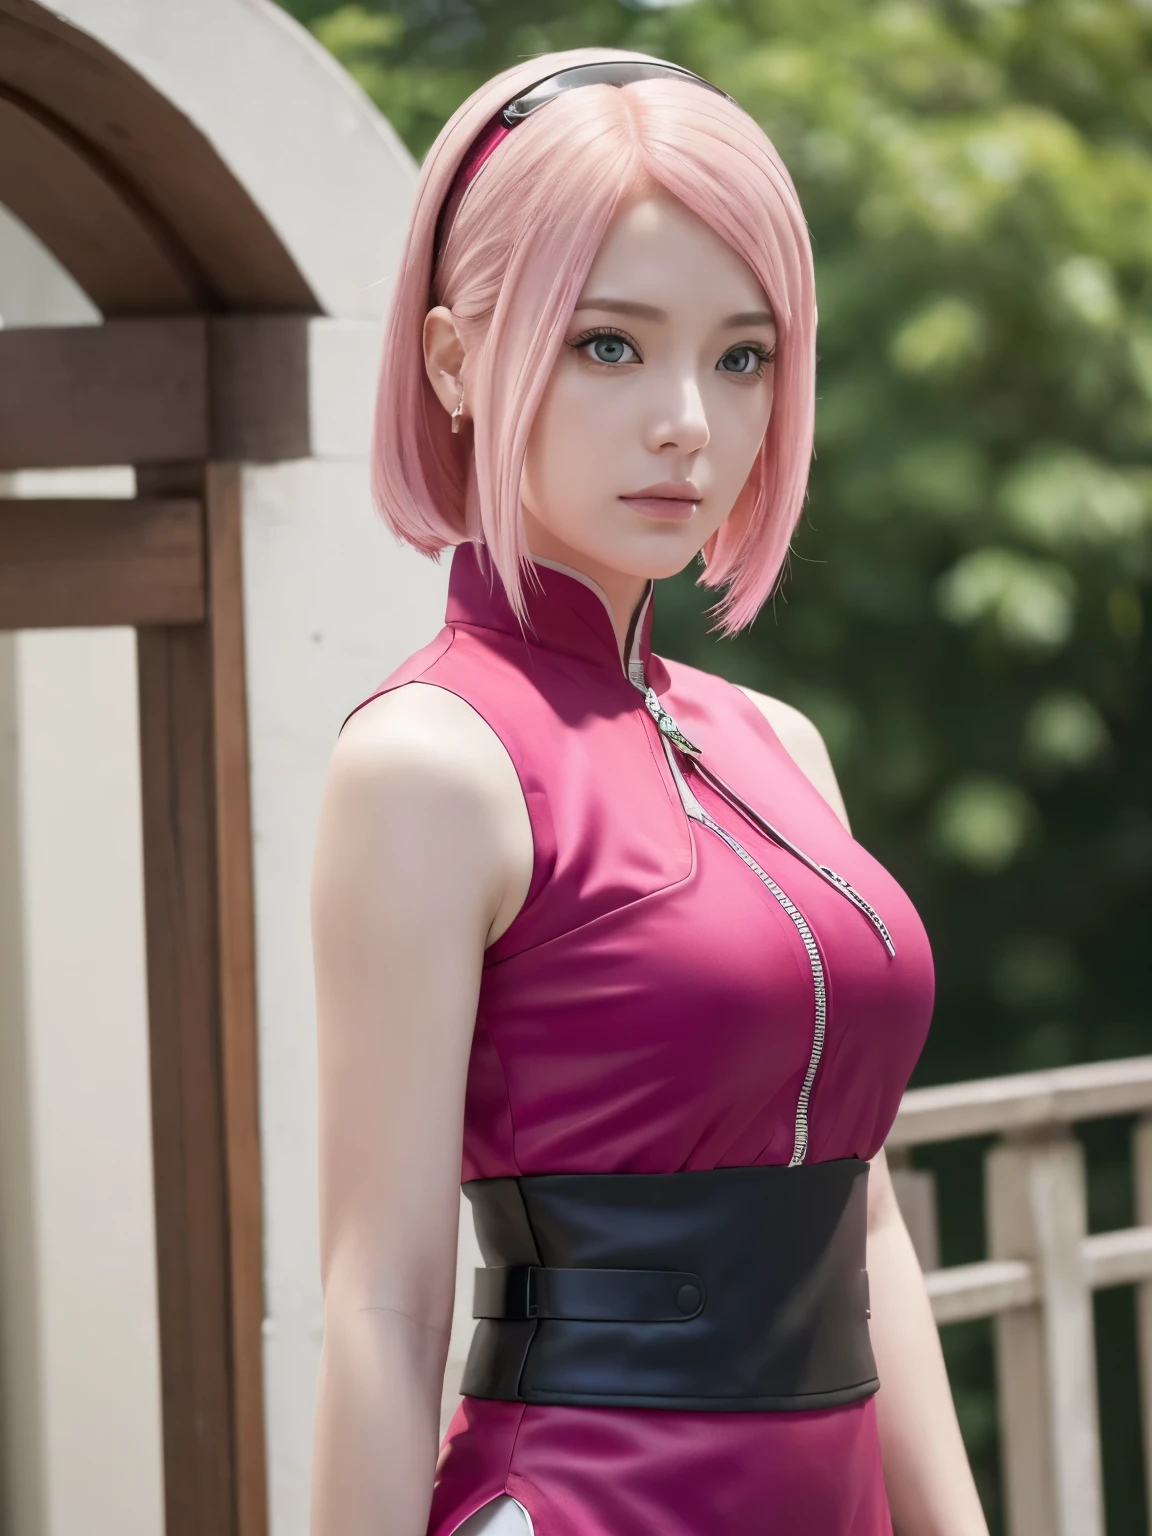 (((masterpiece+highest quality+High resolution+Very detailed))), Sakura Haruno, solo, (([woman]: 1.3 + [beauty]: 1.3+ pink hair: 1.5)), pink eyes, Bright Eyes, Dynamic angles and postures, wallpaper, ((natural big breasts:1.2)), Sakura Haruno outfit, (Ultra Realistic:1.5), (Photo Realistic:1.5), (UHD:1.5), red qipao dress(sleeveless ) with slits along the sides accompanied by a zipper and white circular designs, crystal tattoo at the forehead